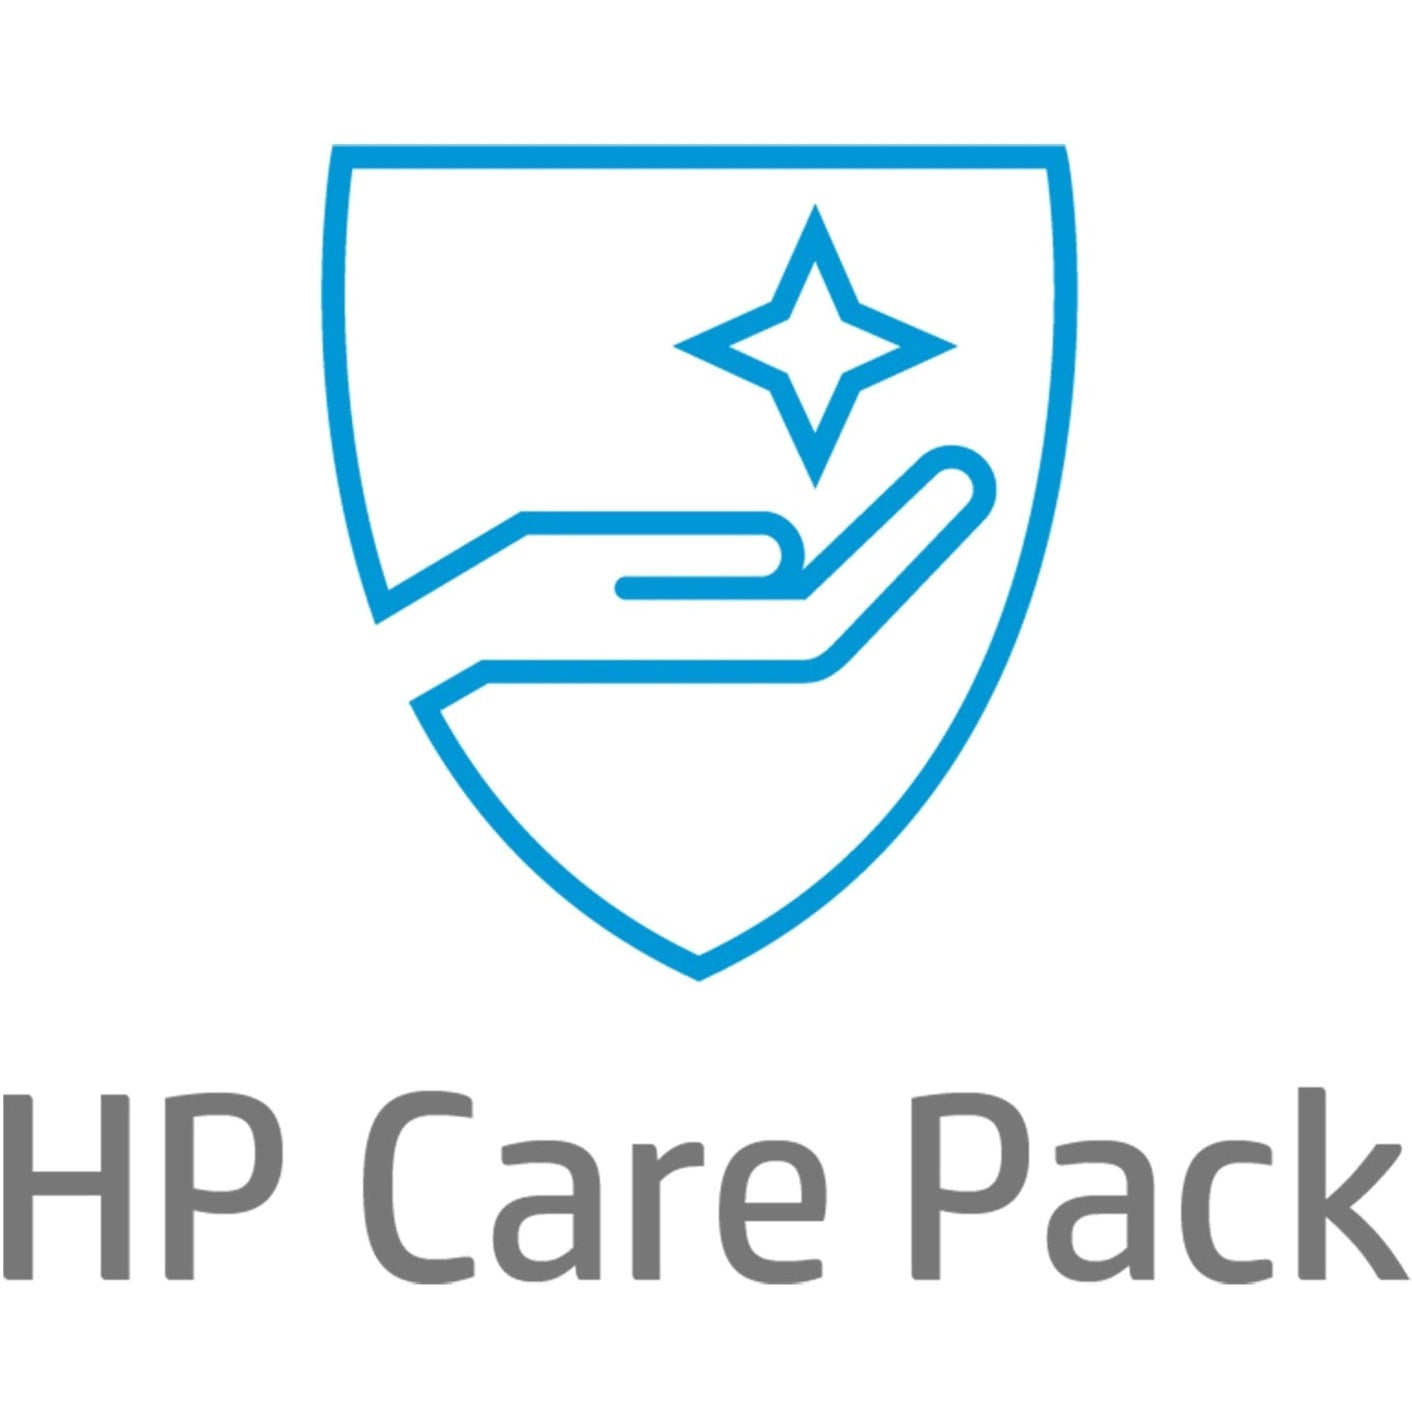 HP Care Pack Hardware Support with Disk Retention - Extended Service - 5 Year - Service (UB0E9E)